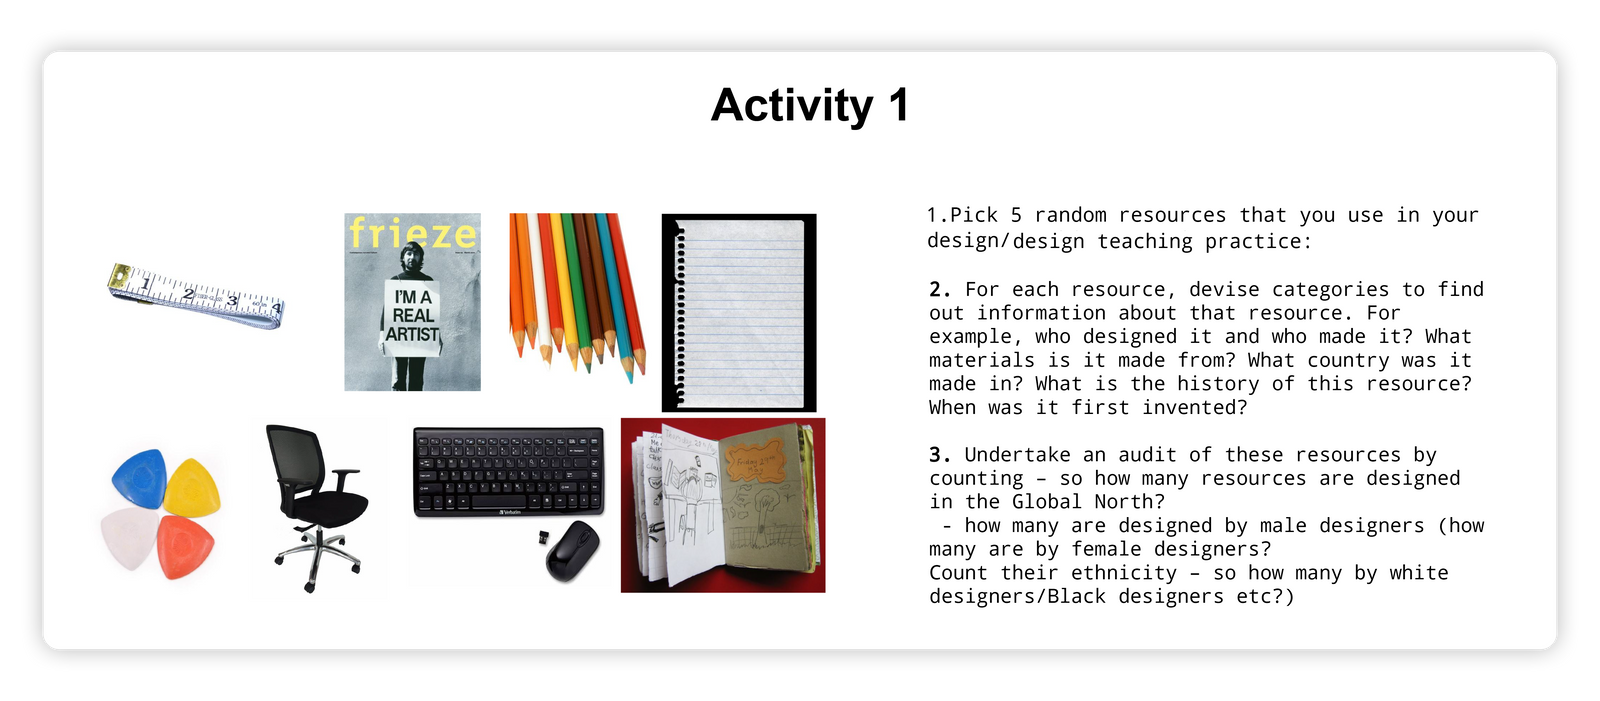 Activity Workshop slide by Tanveer Ahmed looking critically at resources we use in our design and teaching practices.